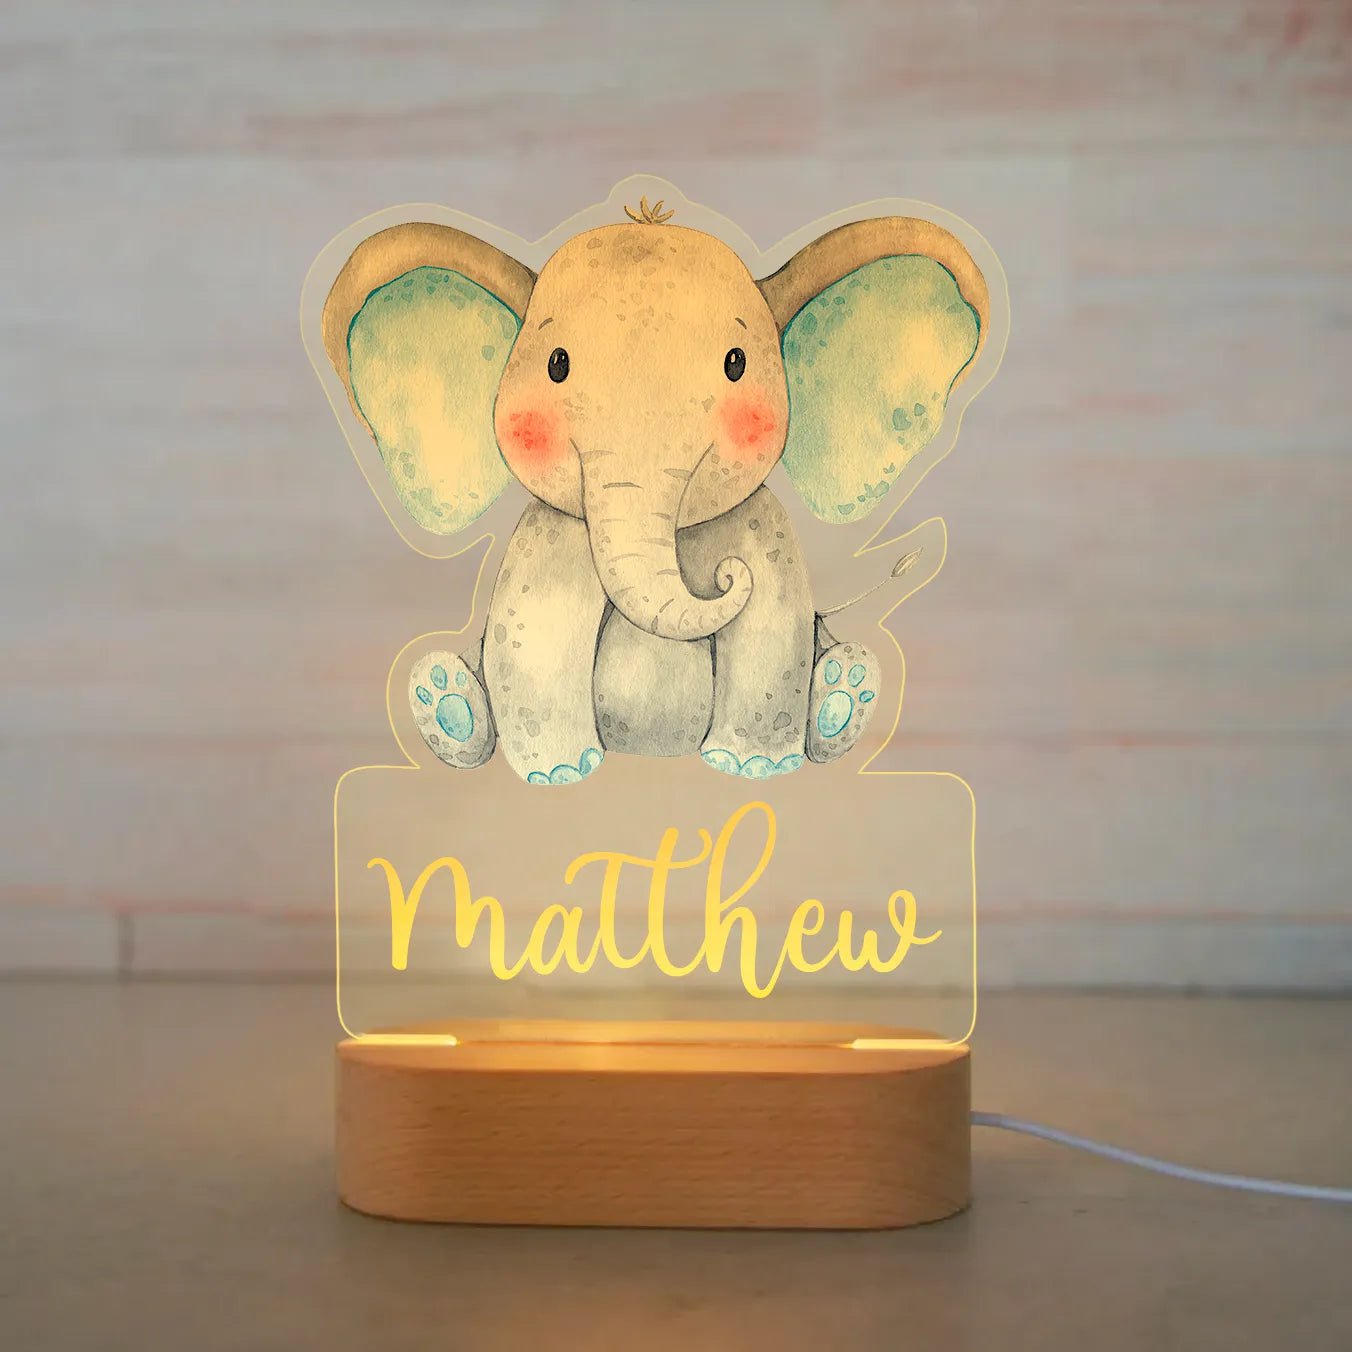 Customized Animal-themed Night Light for Kids - Personalized with Child's Name, Acrylic Lamp for Bedroom Decor Warm Light / 17Elephant